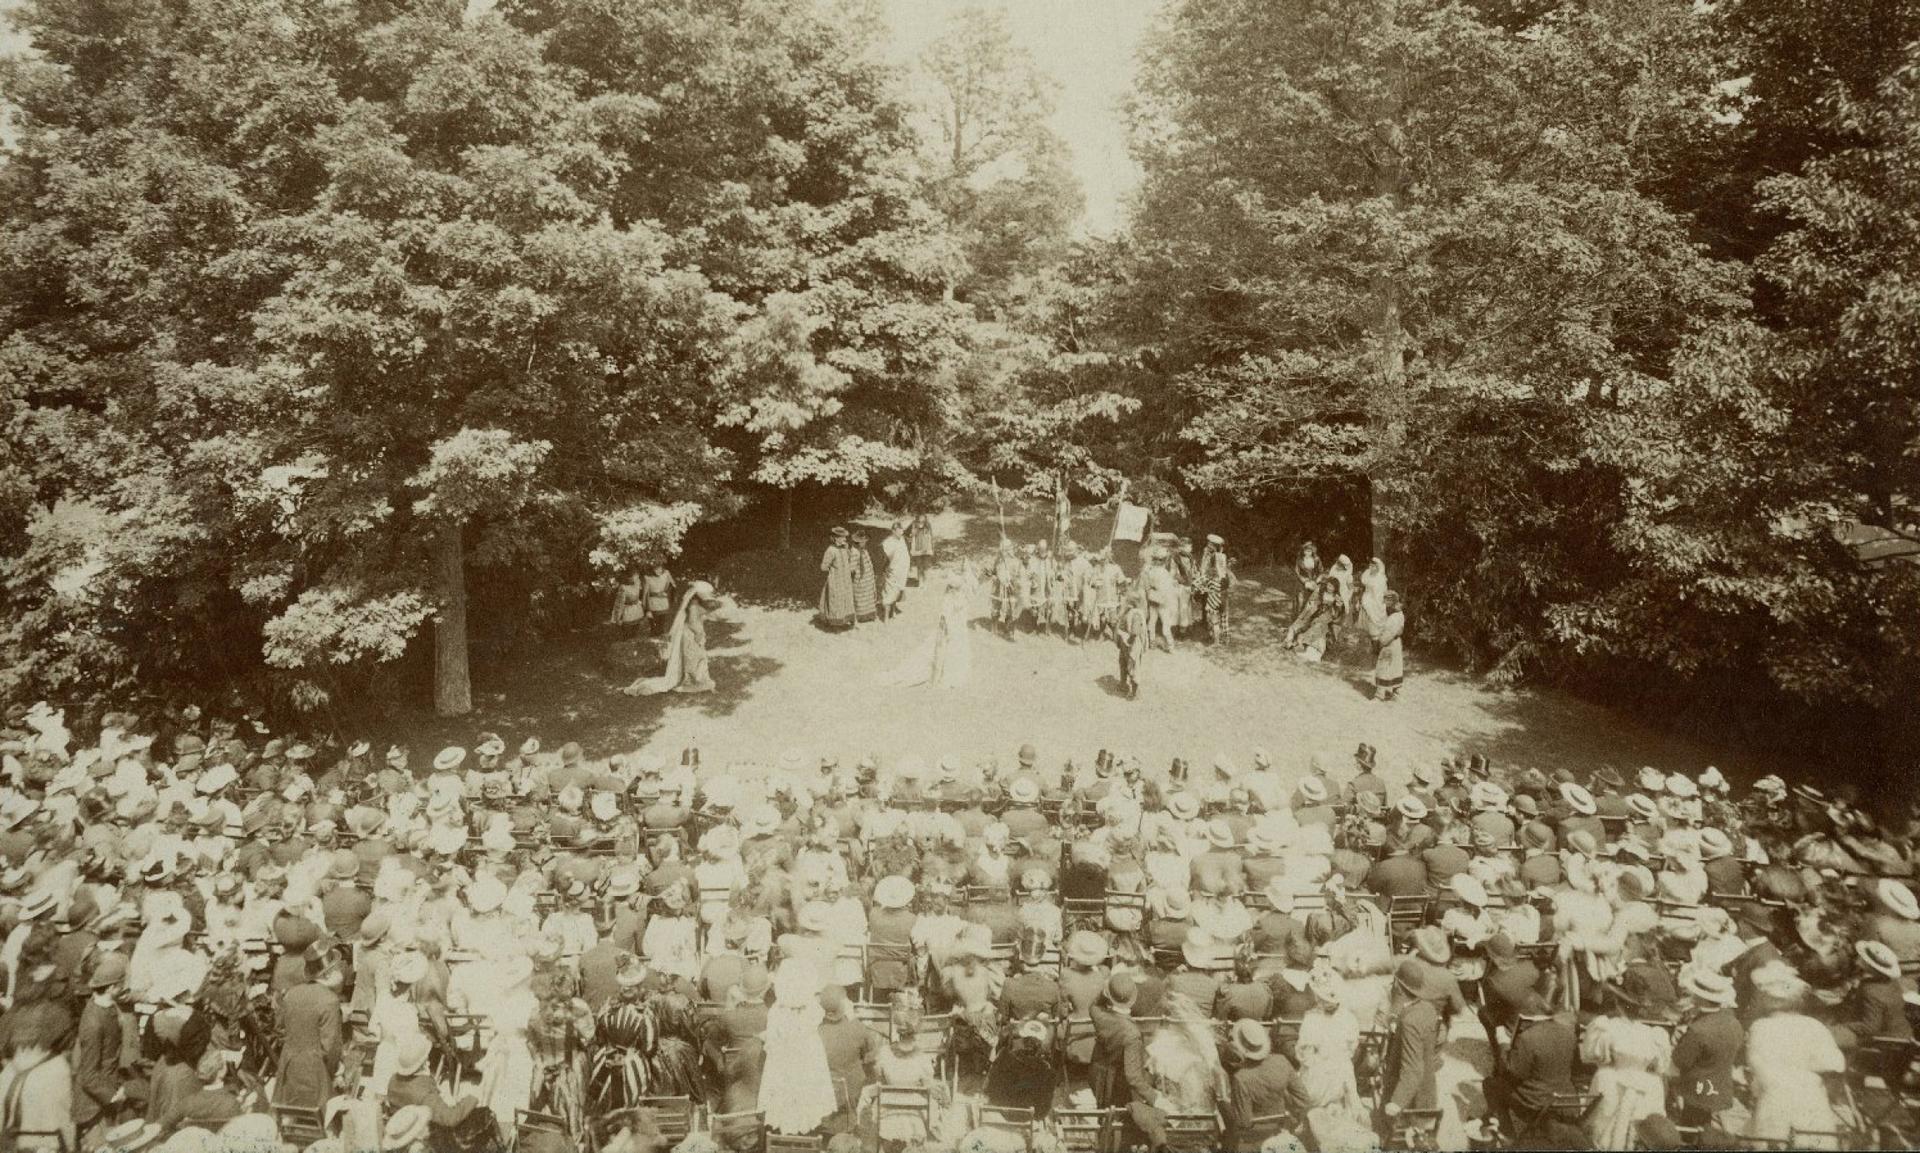 An open air performance of Shakespeare’s “As You Like It” in Lake Forest, Illinois in 1892.